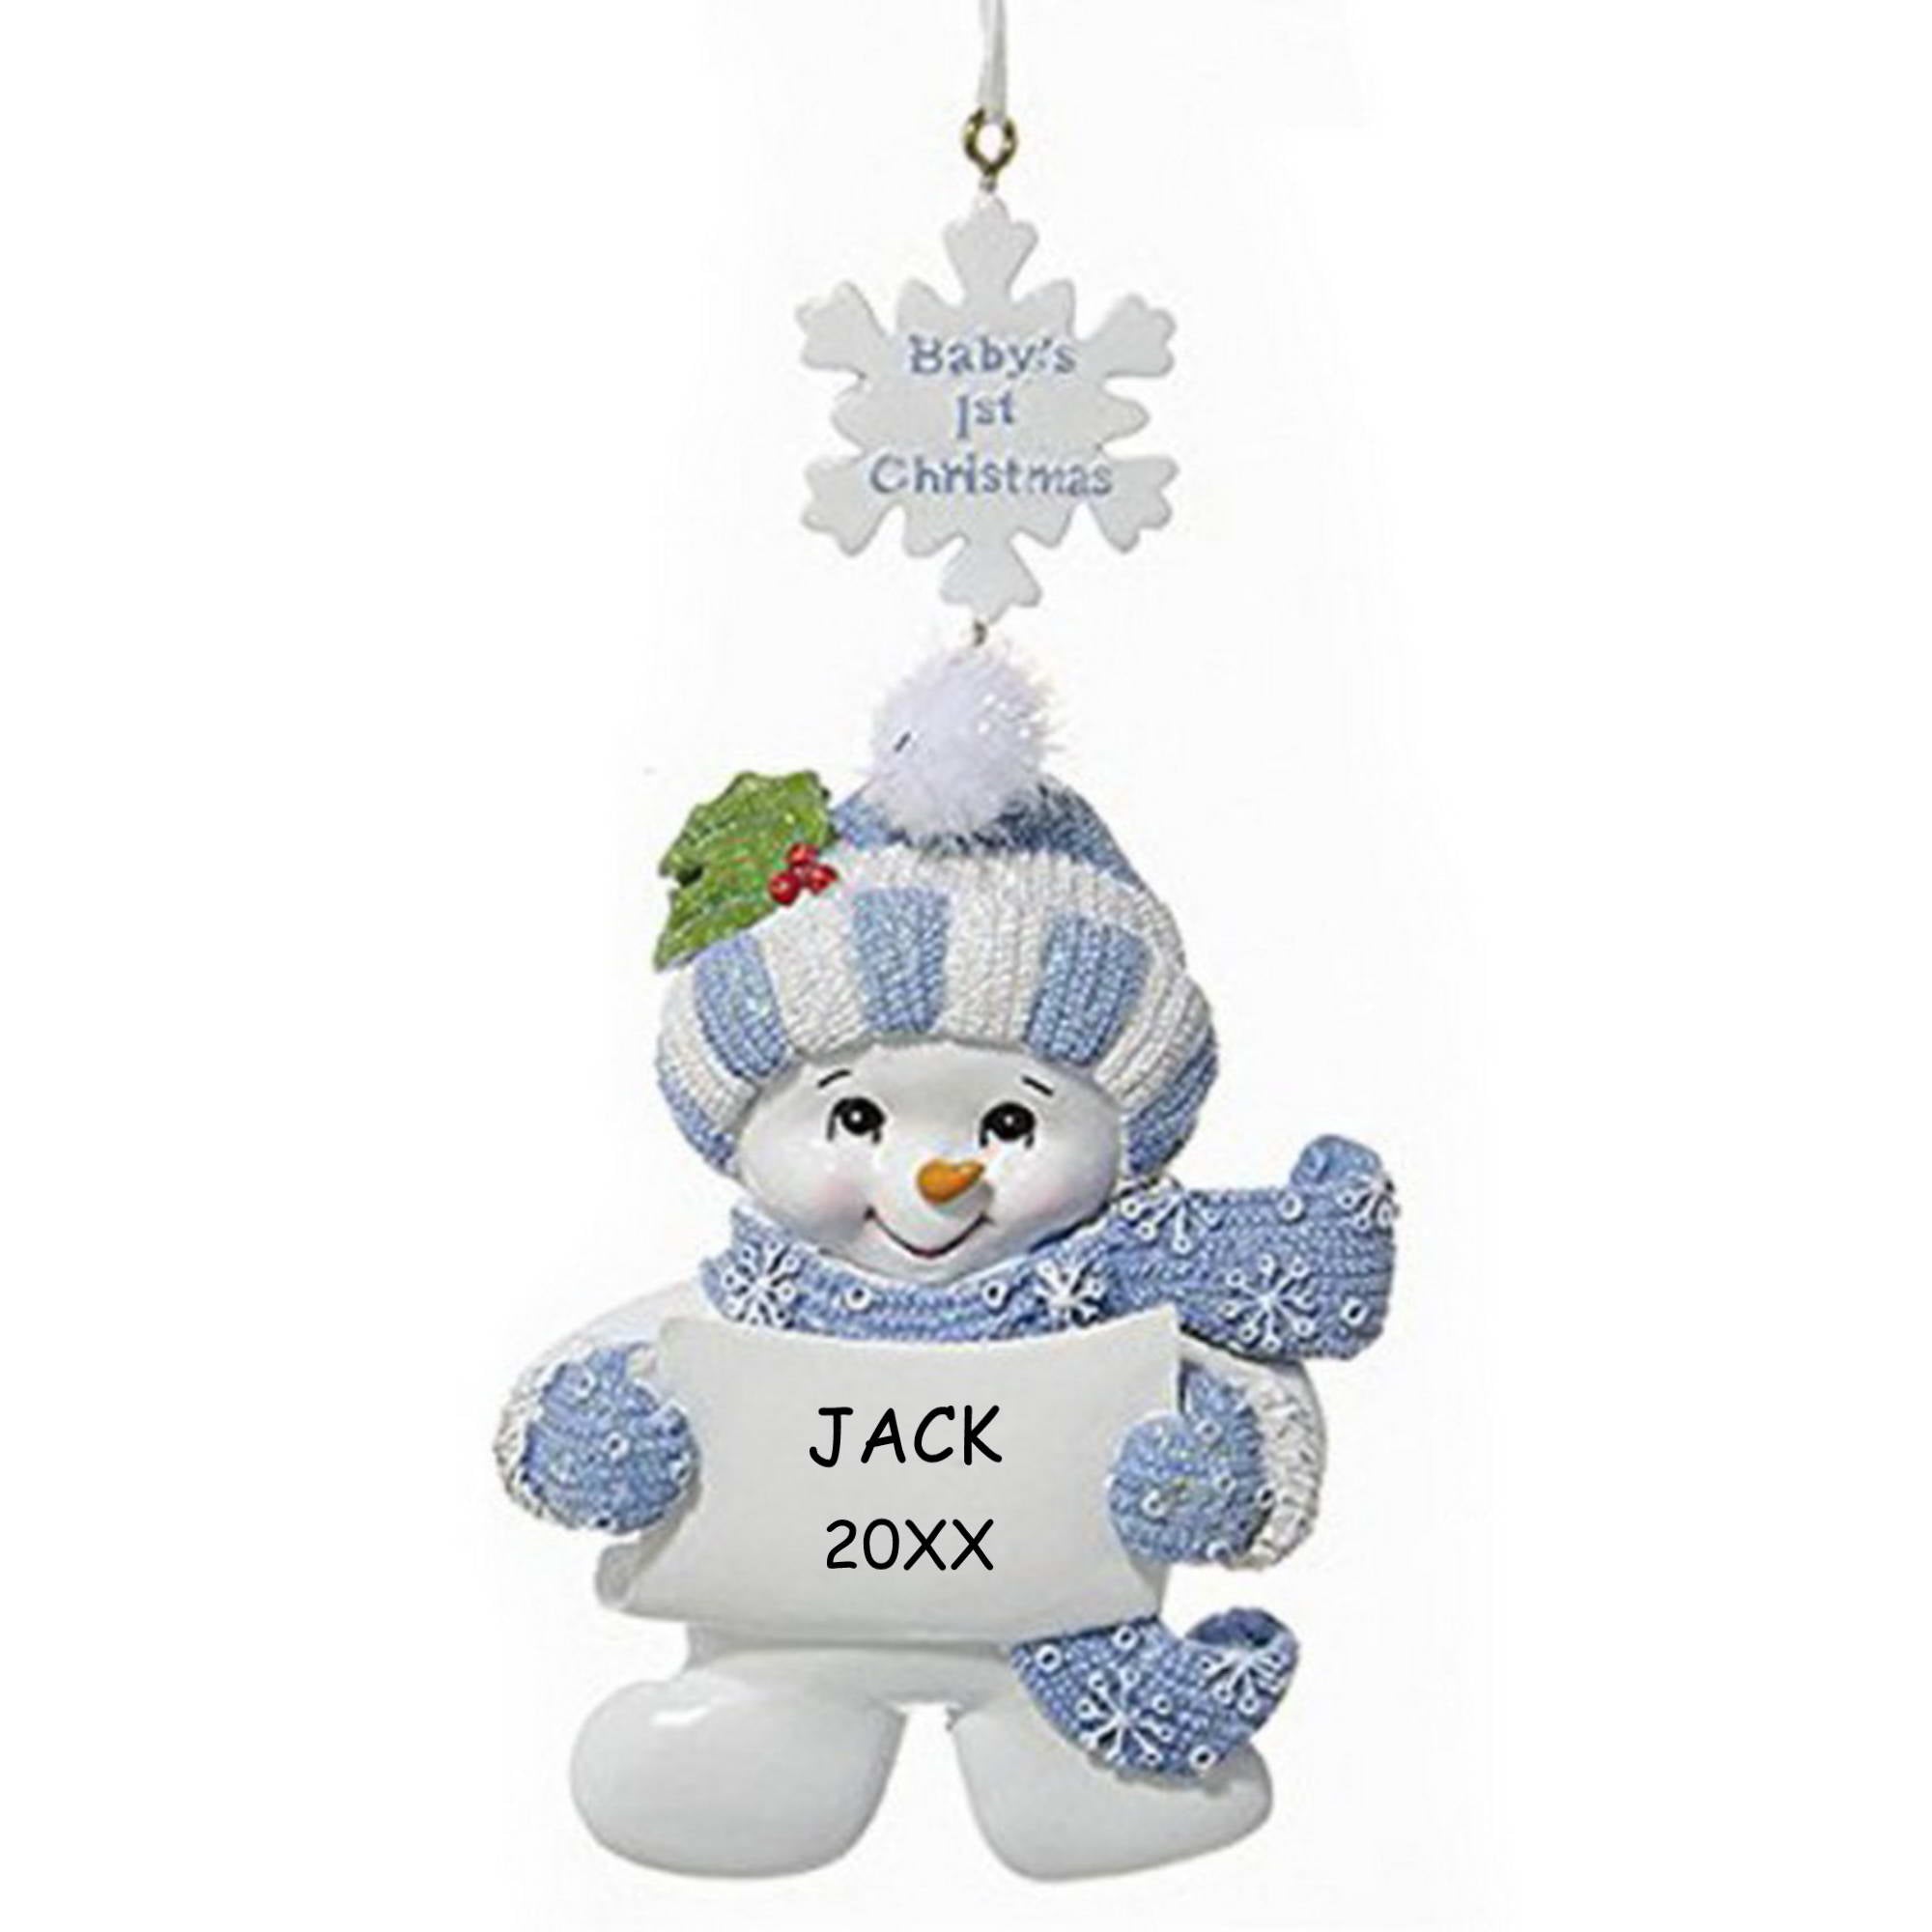 Personalized Baby's 1st Christmas Snowman Ornament - Blue